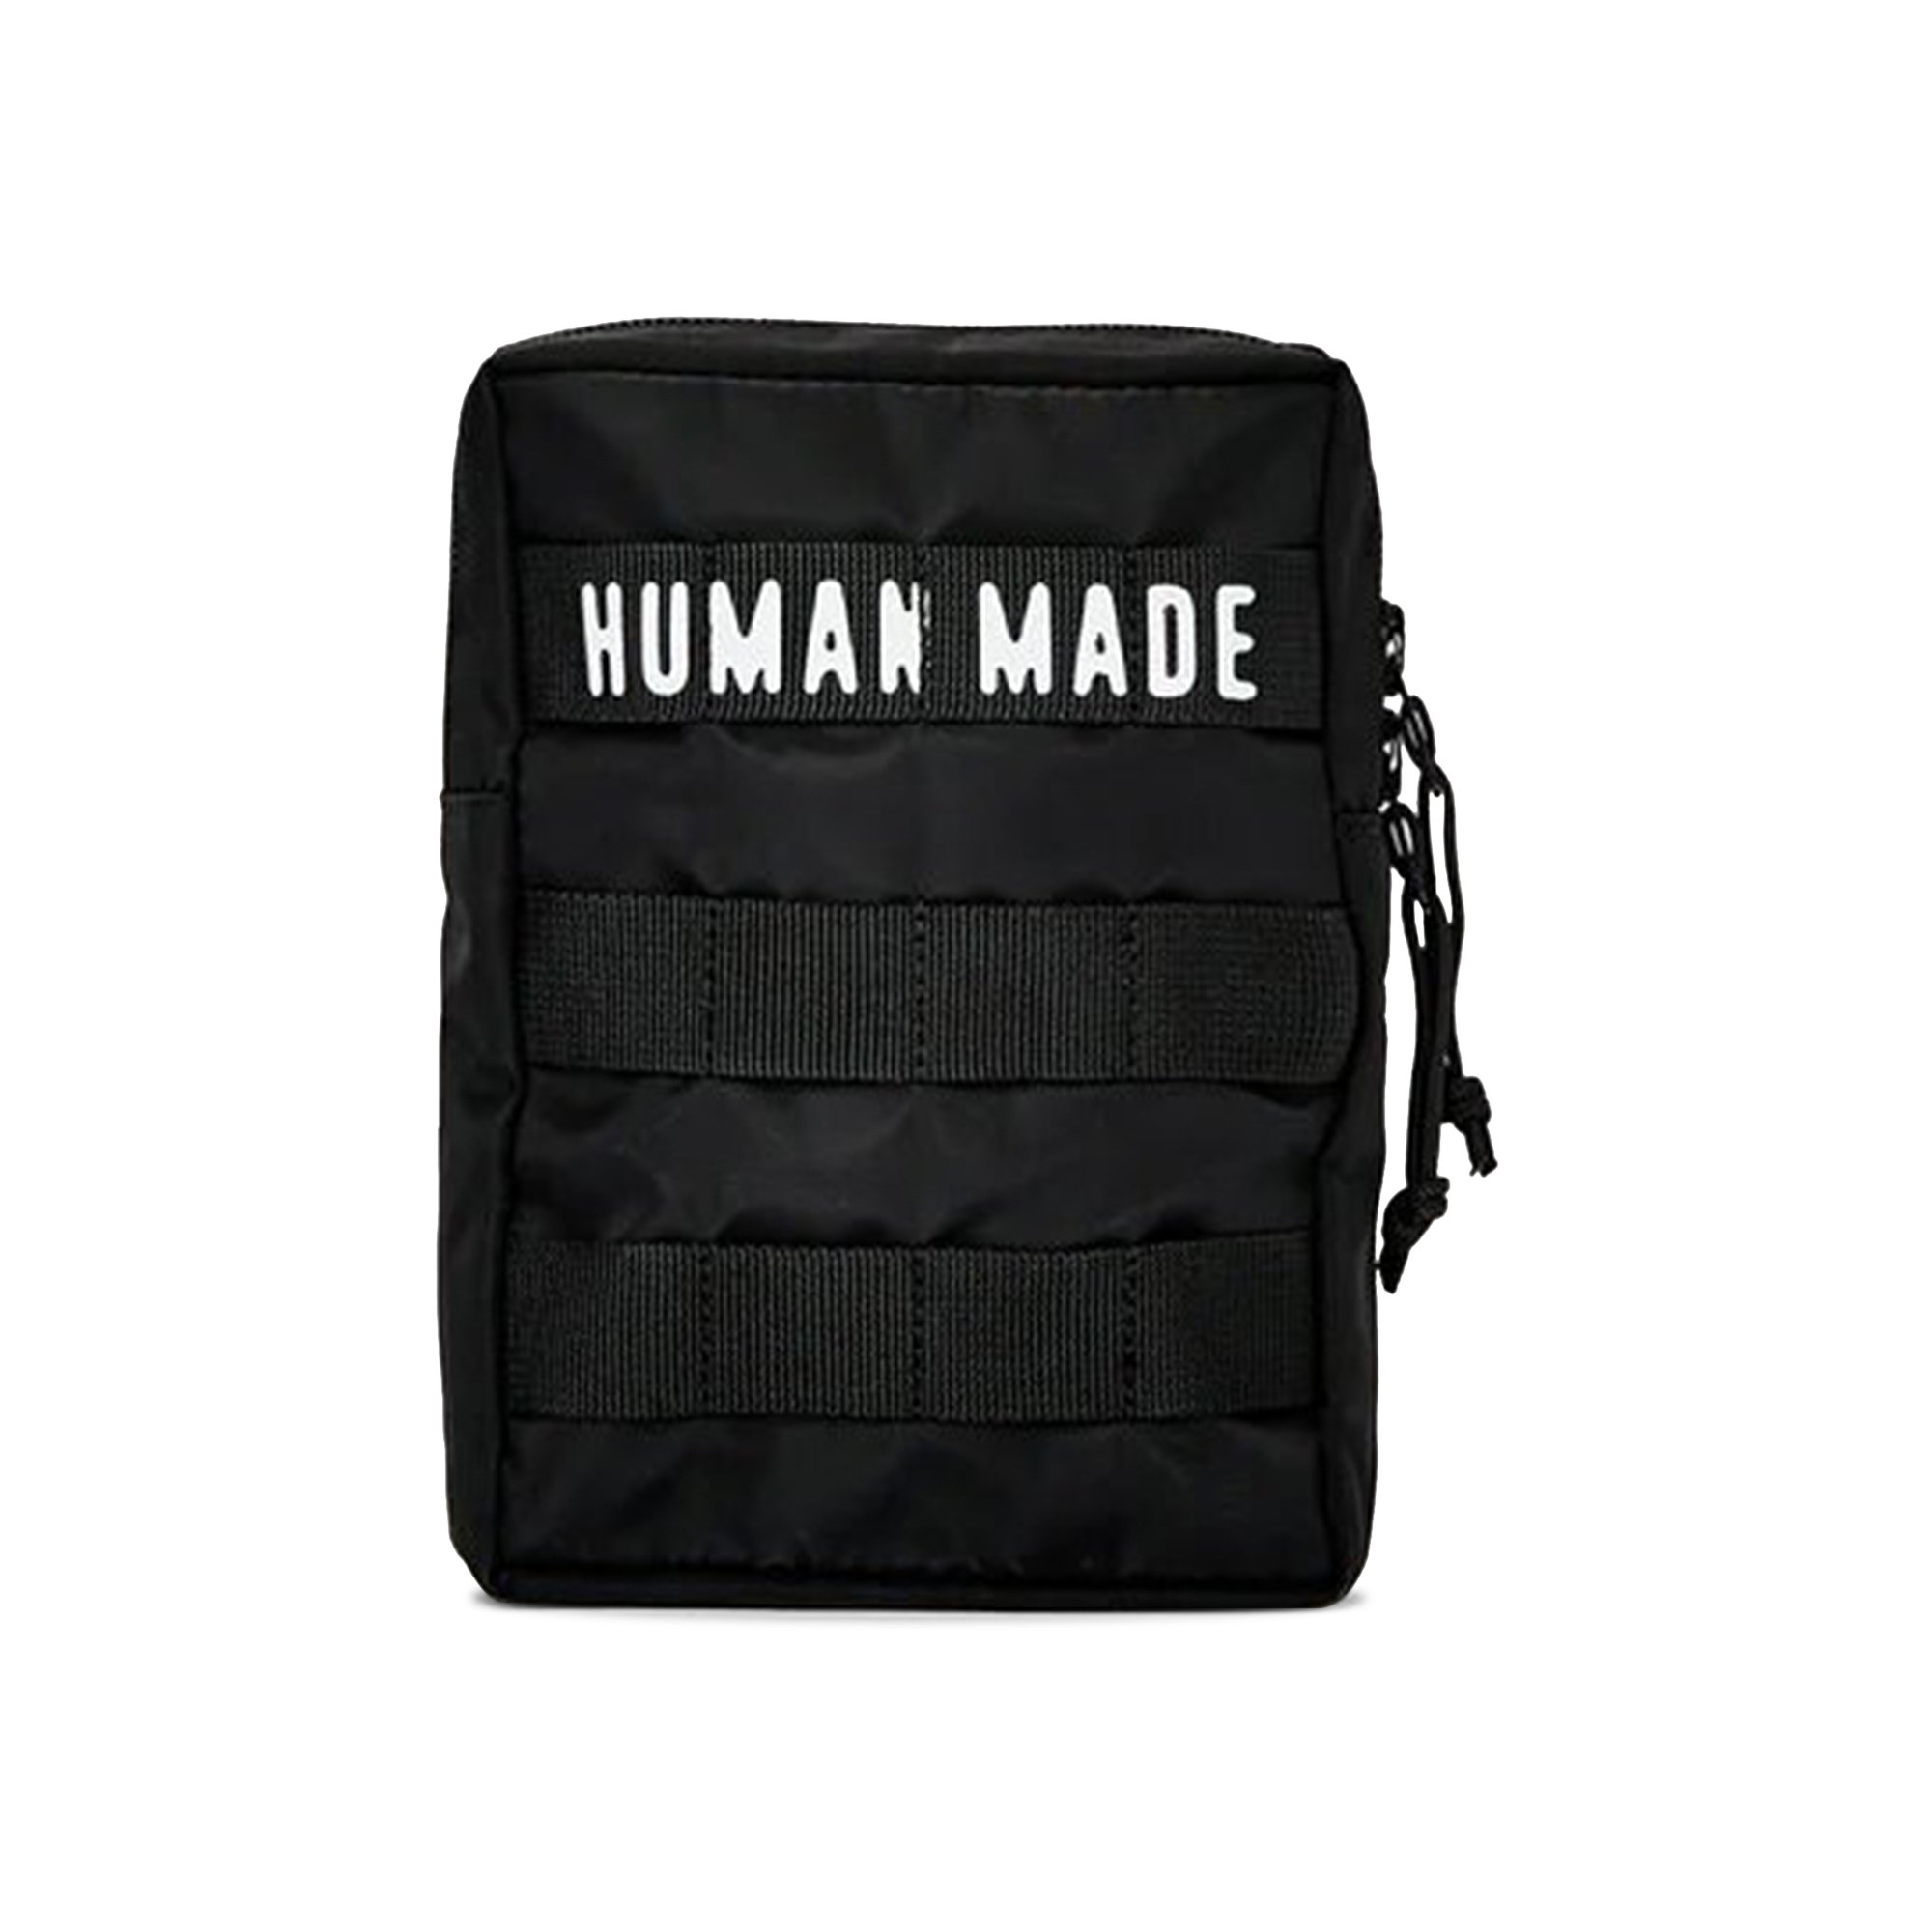 Buy Human Made Military Pouch #2 'Black' - HM25GD025 BLAC | GOAT